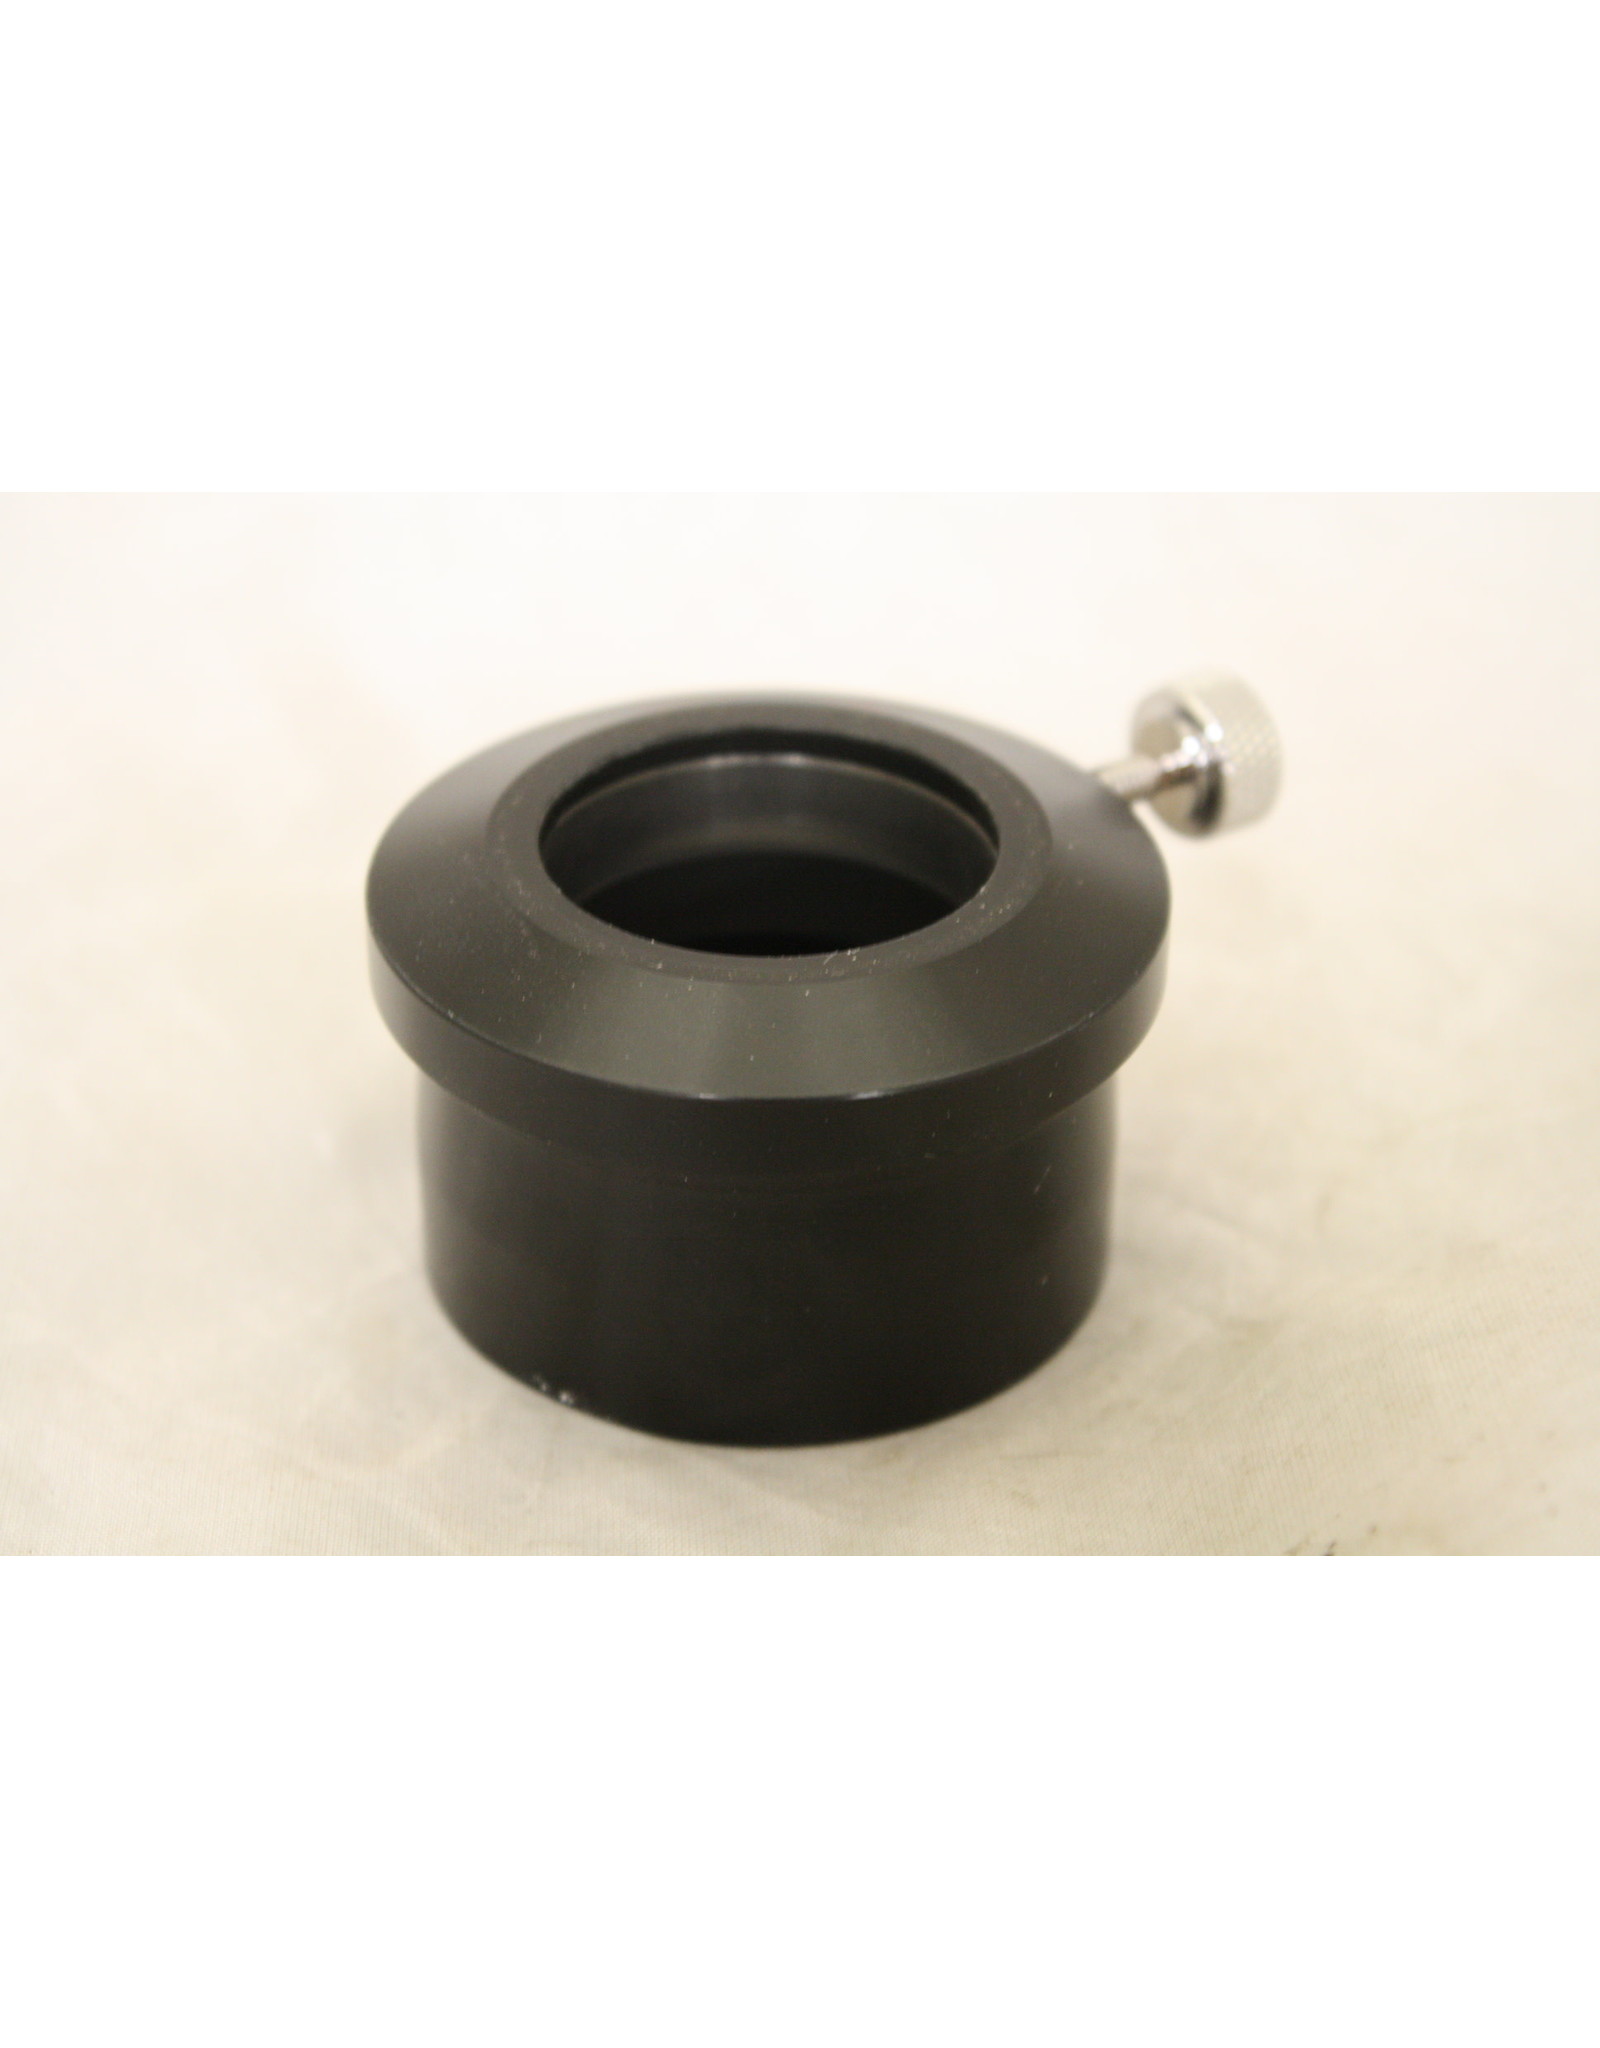 2-1.25 Reducer Adapter (Pre-owned)